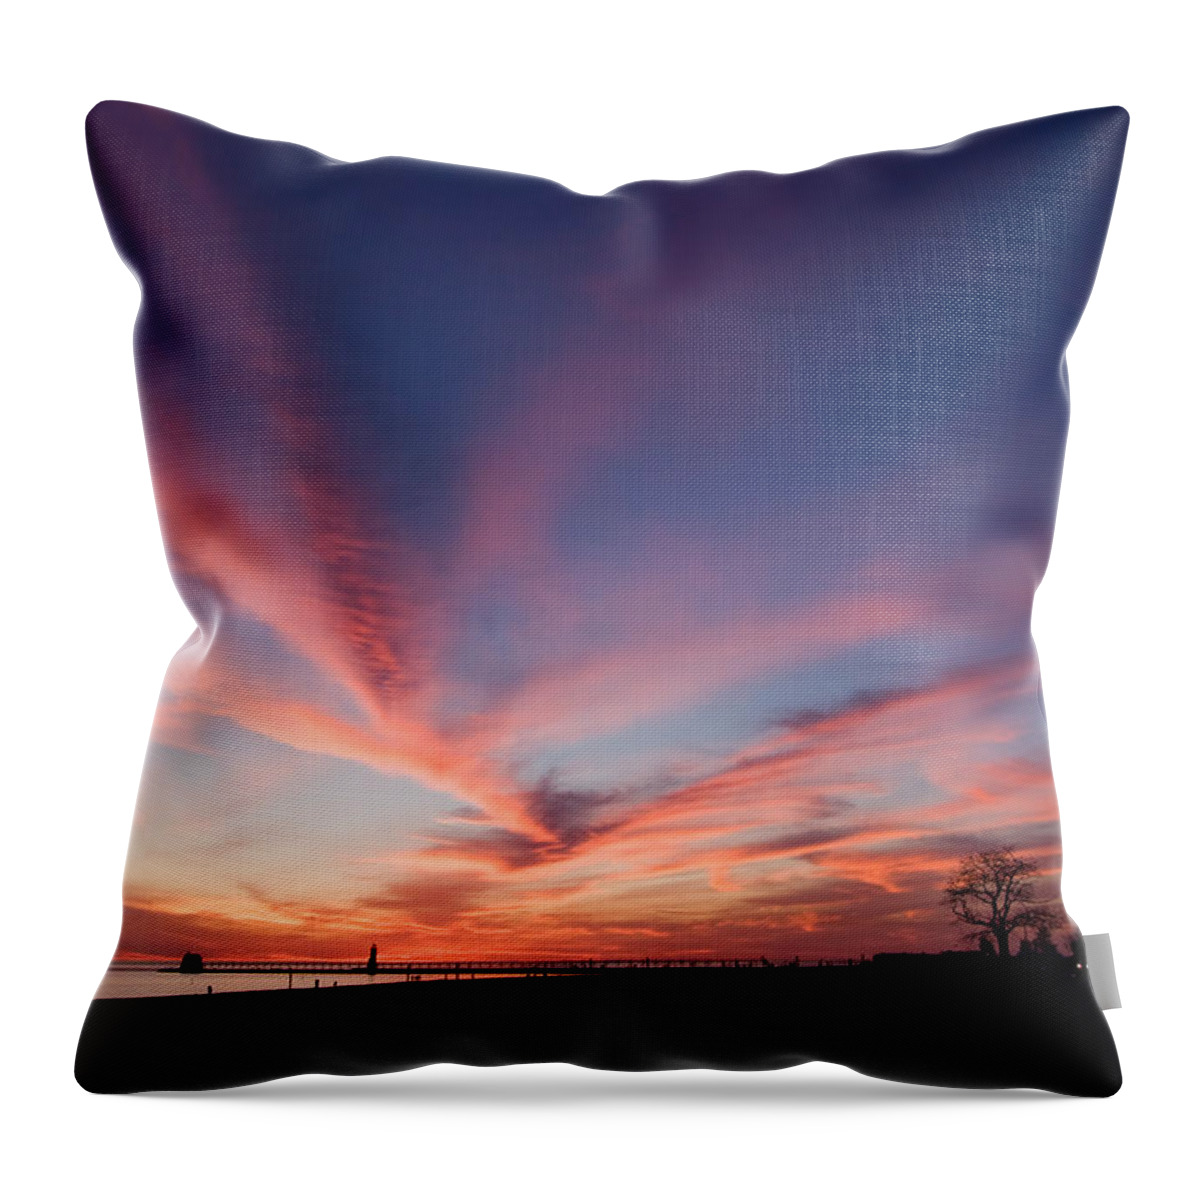 3scape Throw Pillow featuring the photograph Grand Haven Sunset by Adam Romanowicz